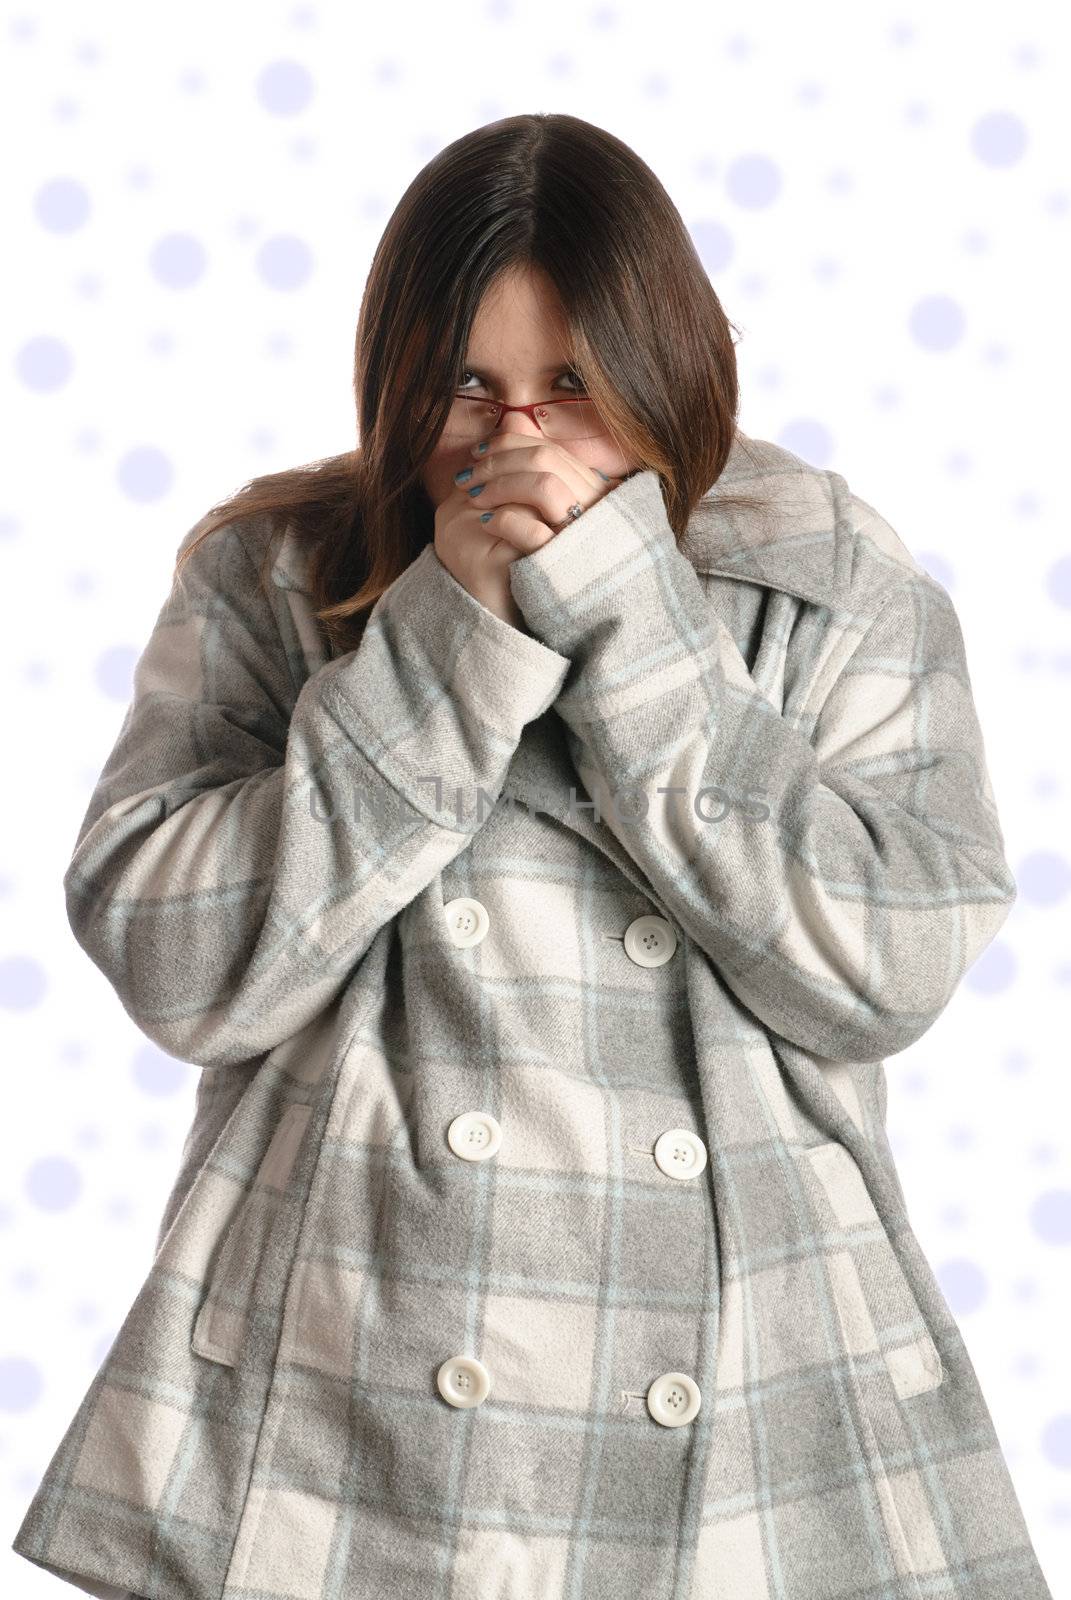 A cold teenage girl is breathing into her hands to warm them up while wearing a fall or winter jacket.